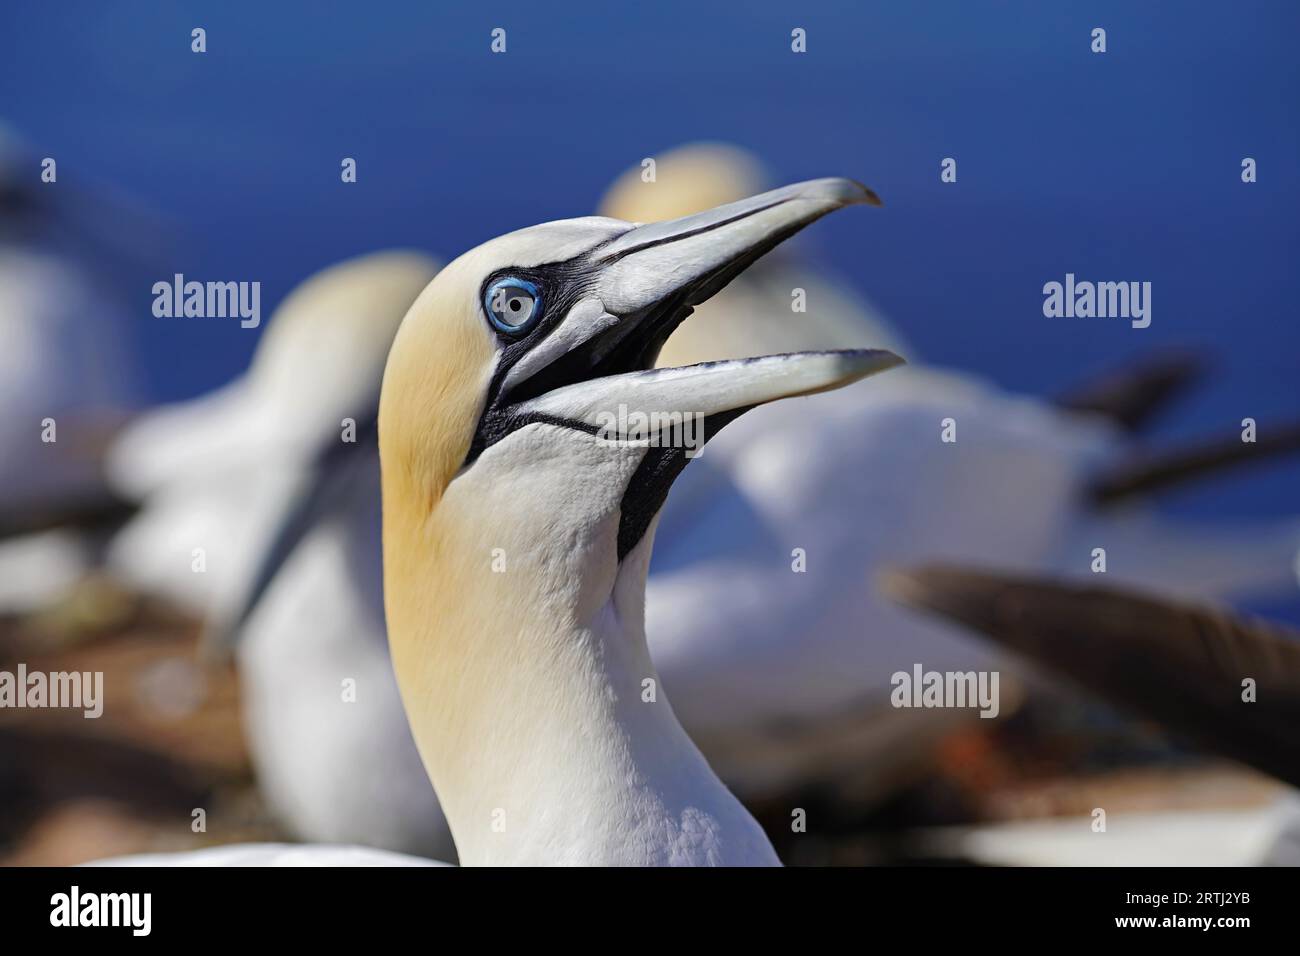 Breeding gannets on the island of Helgoland. The gannet, a goose-sized seabird, is the most northerly breeding species in the gannet family. The Stock Photo